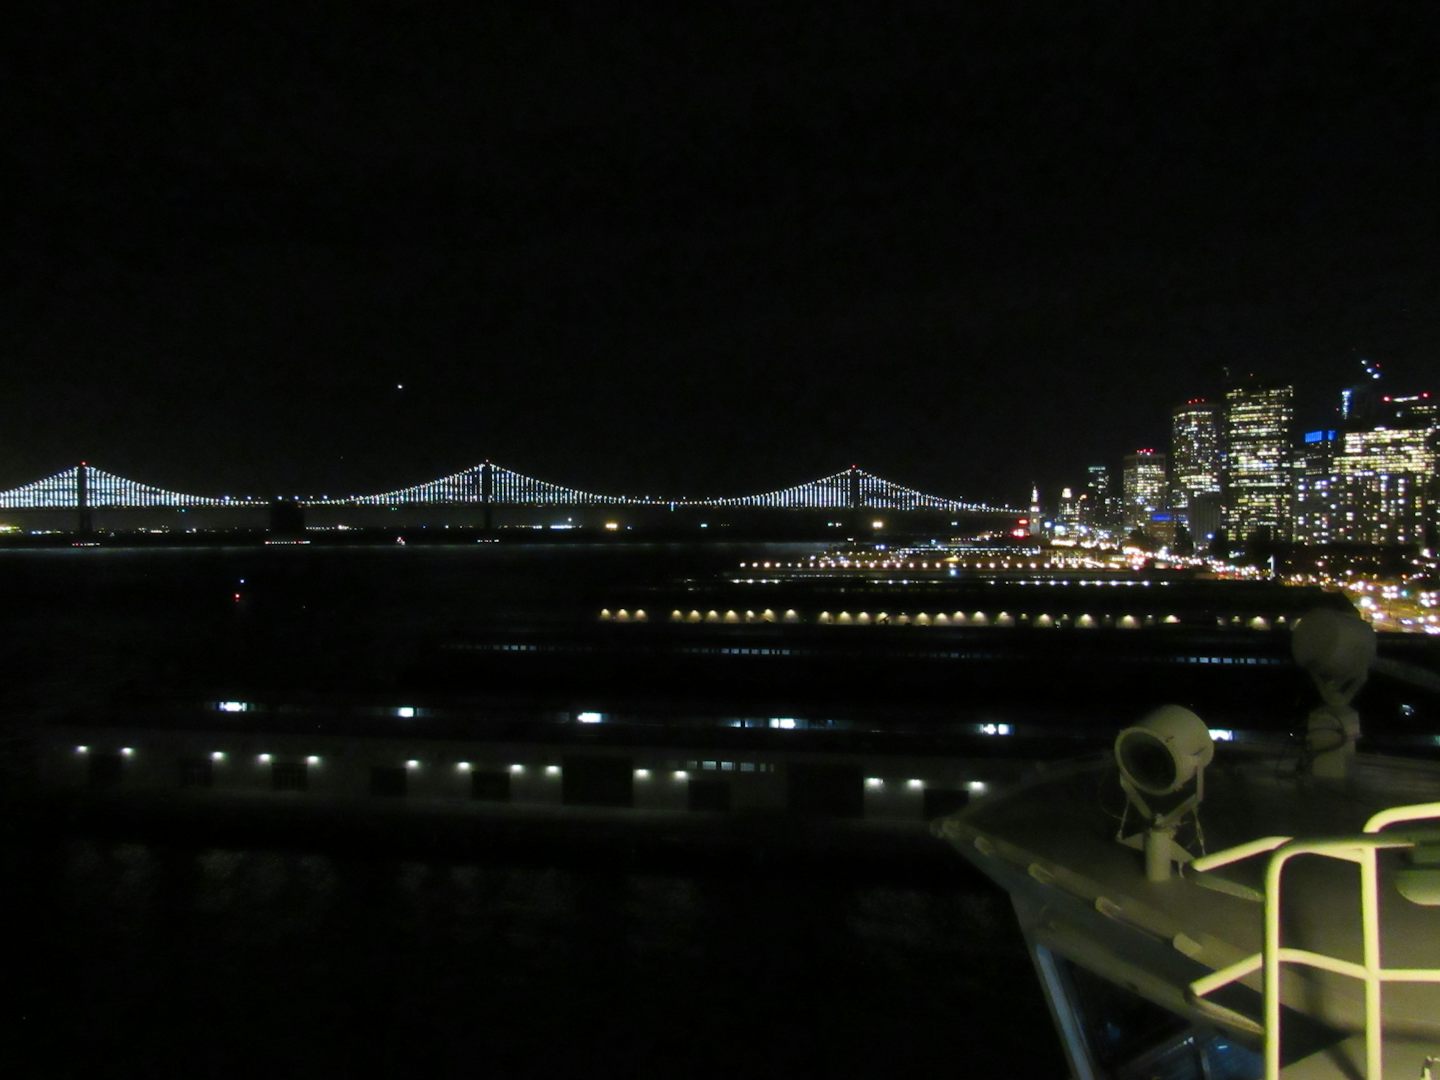 We went to the overlook on deck 13 at night in San Francisco and liked the